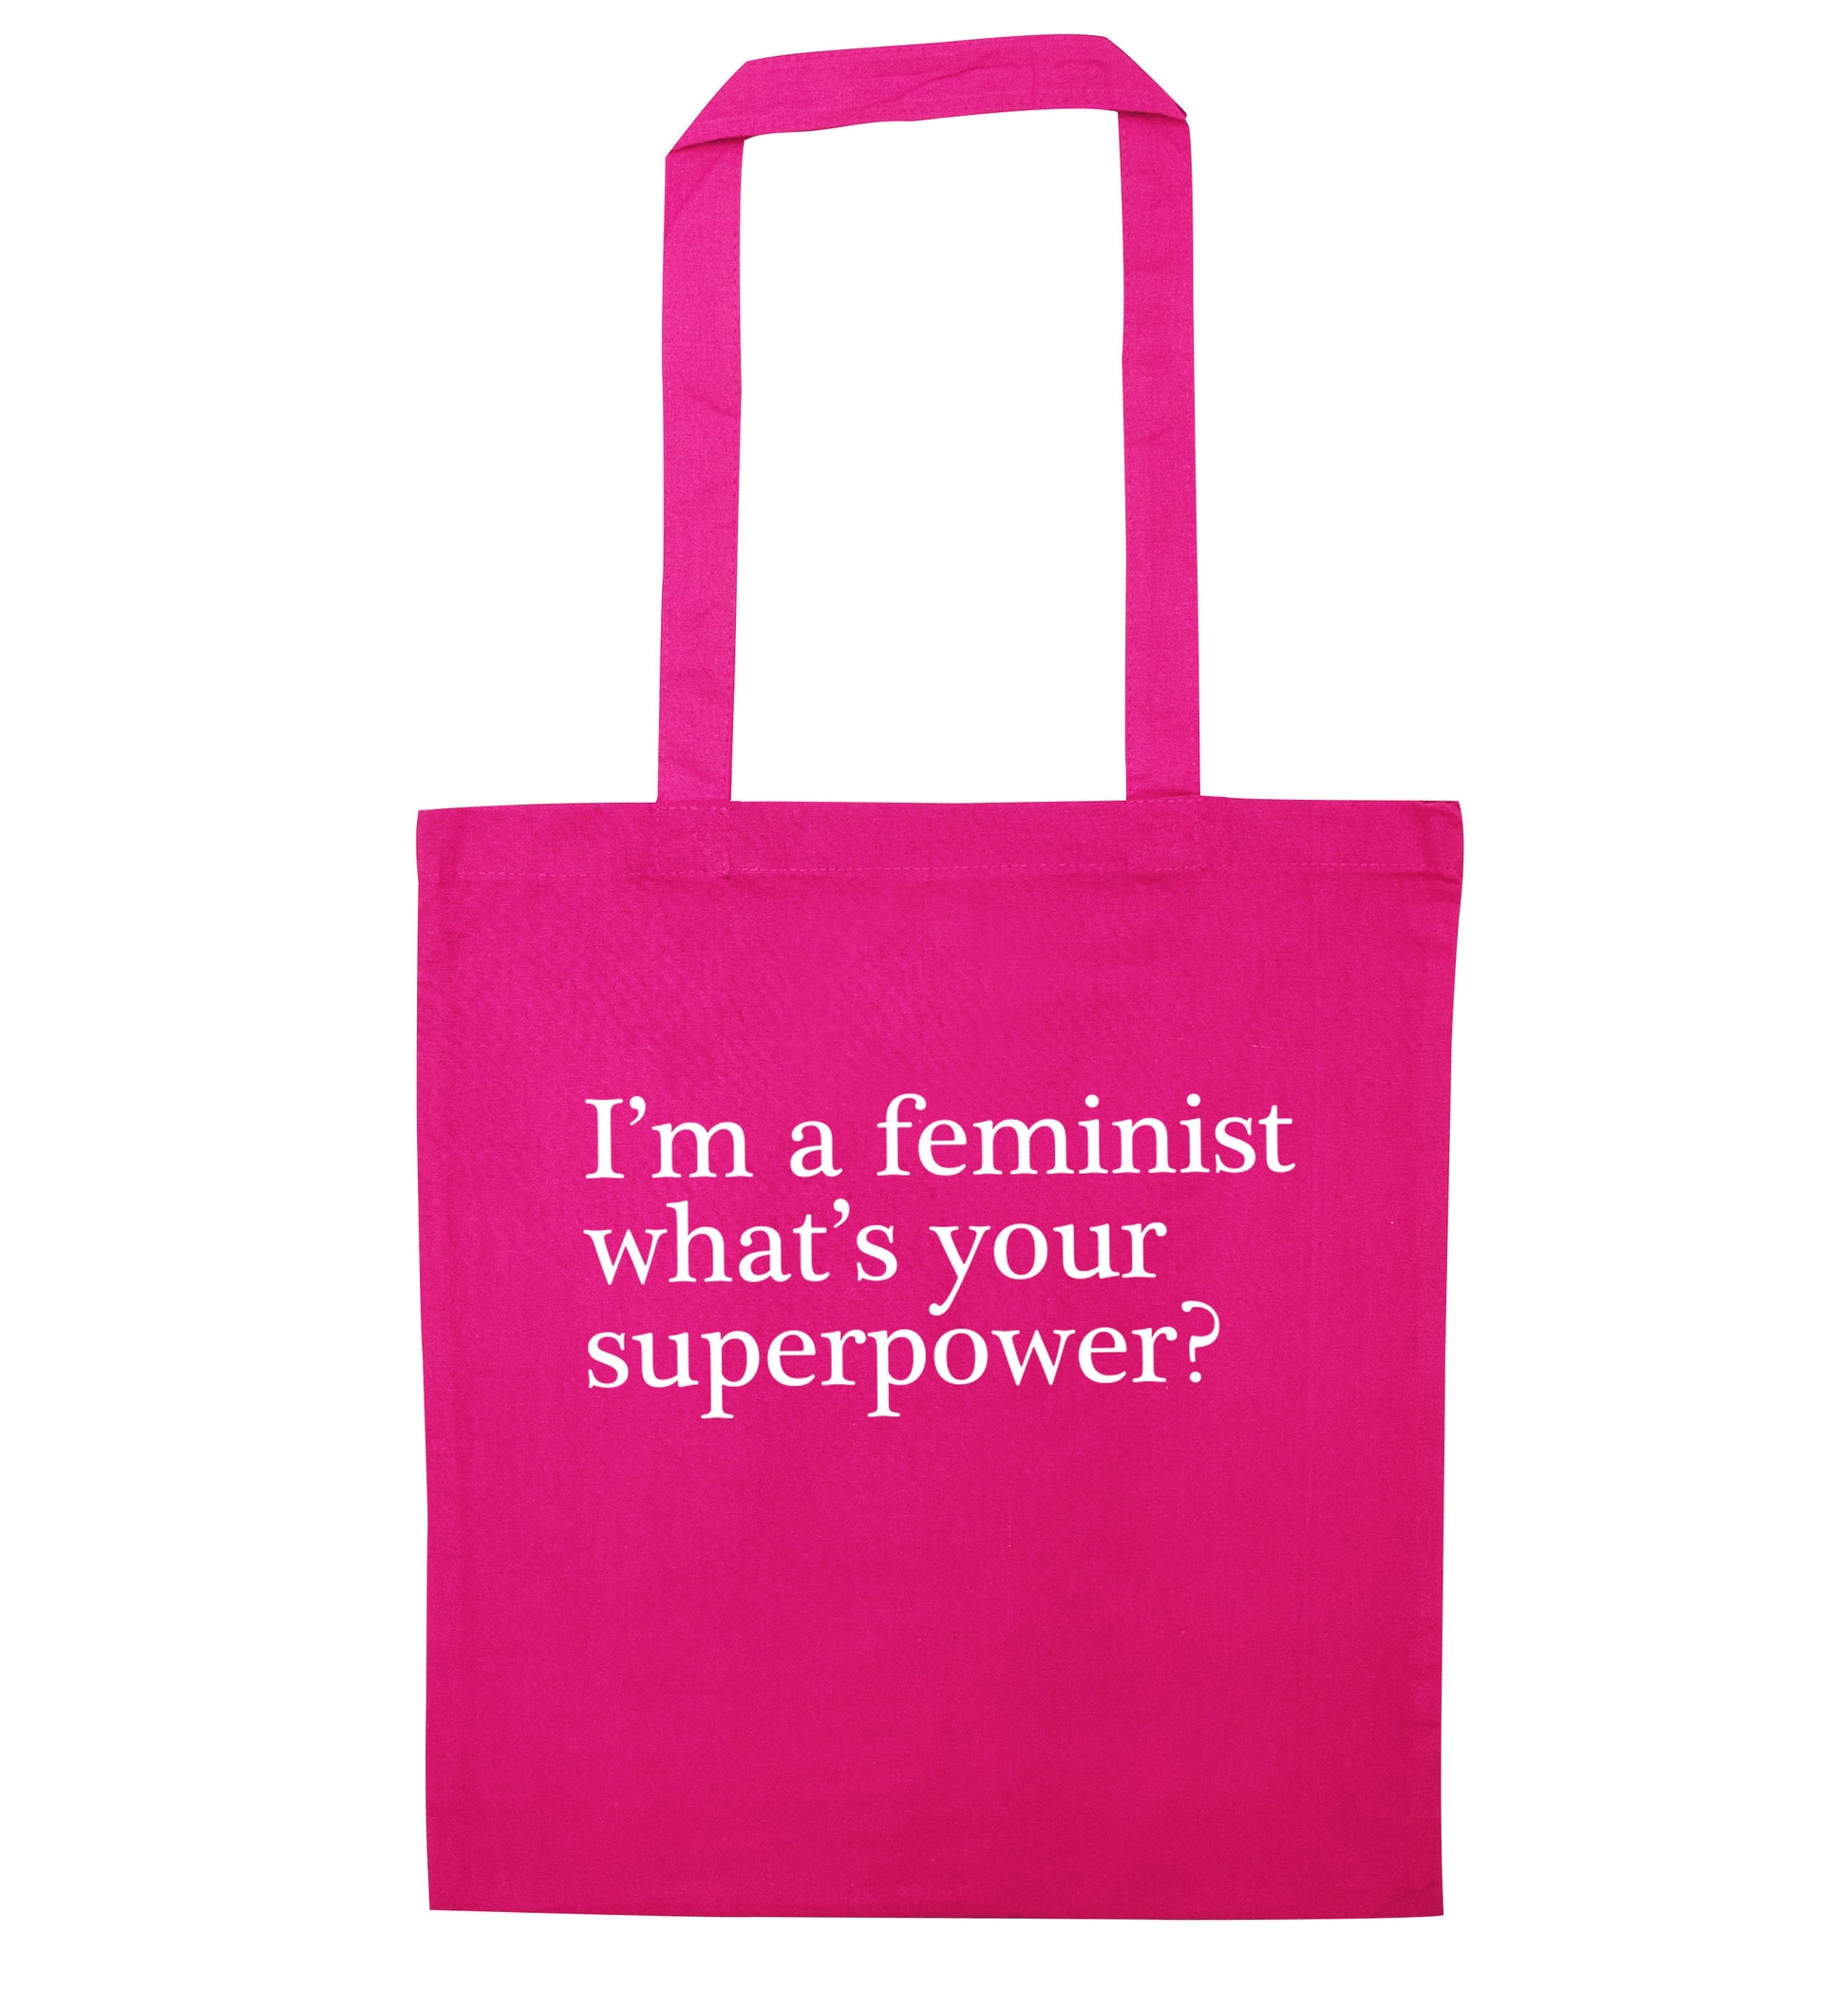 I'm a feminist what's your superpower? pink tote bag